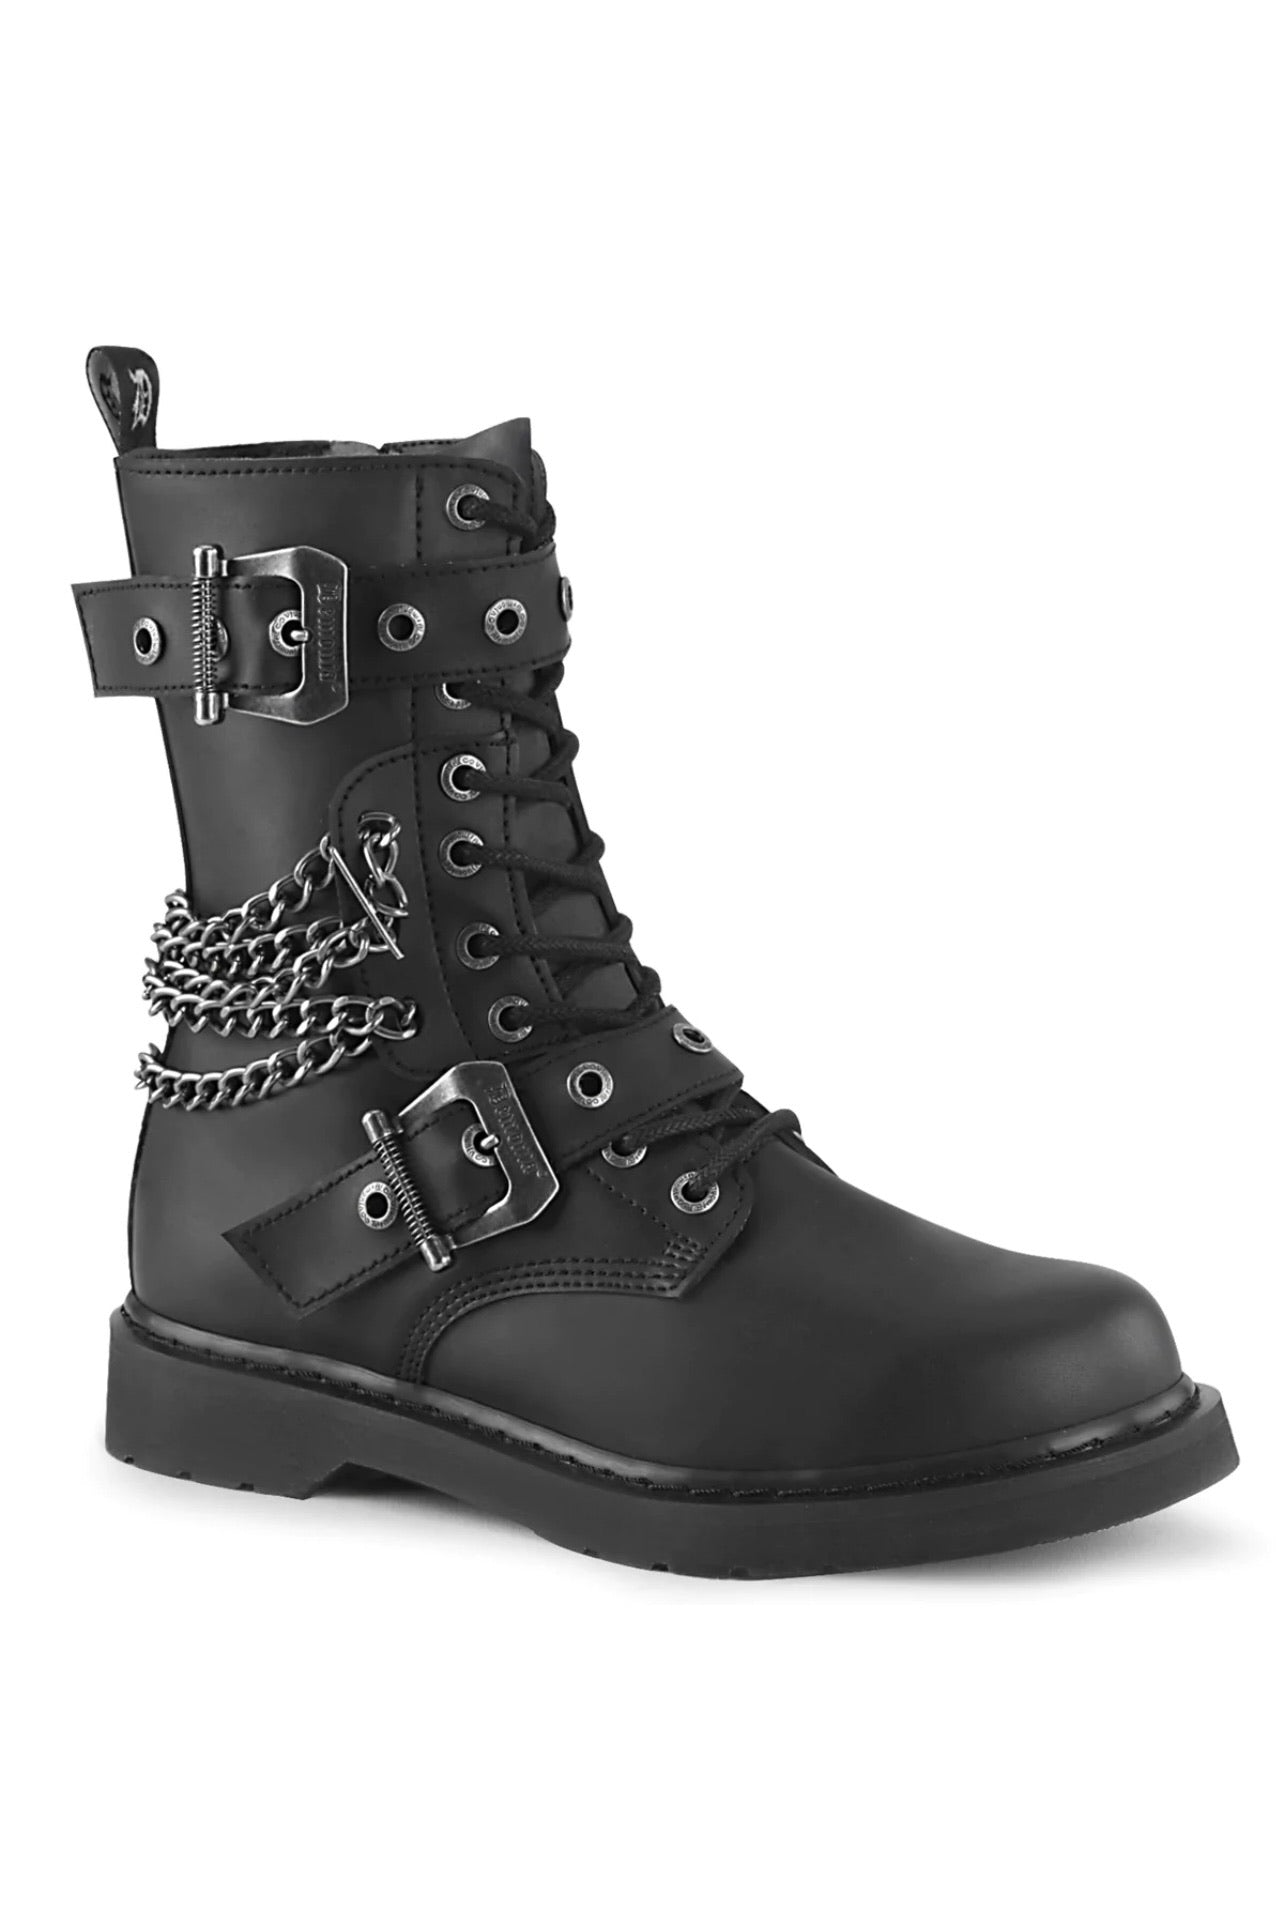 Justice for All Boots – HARMONIA NY